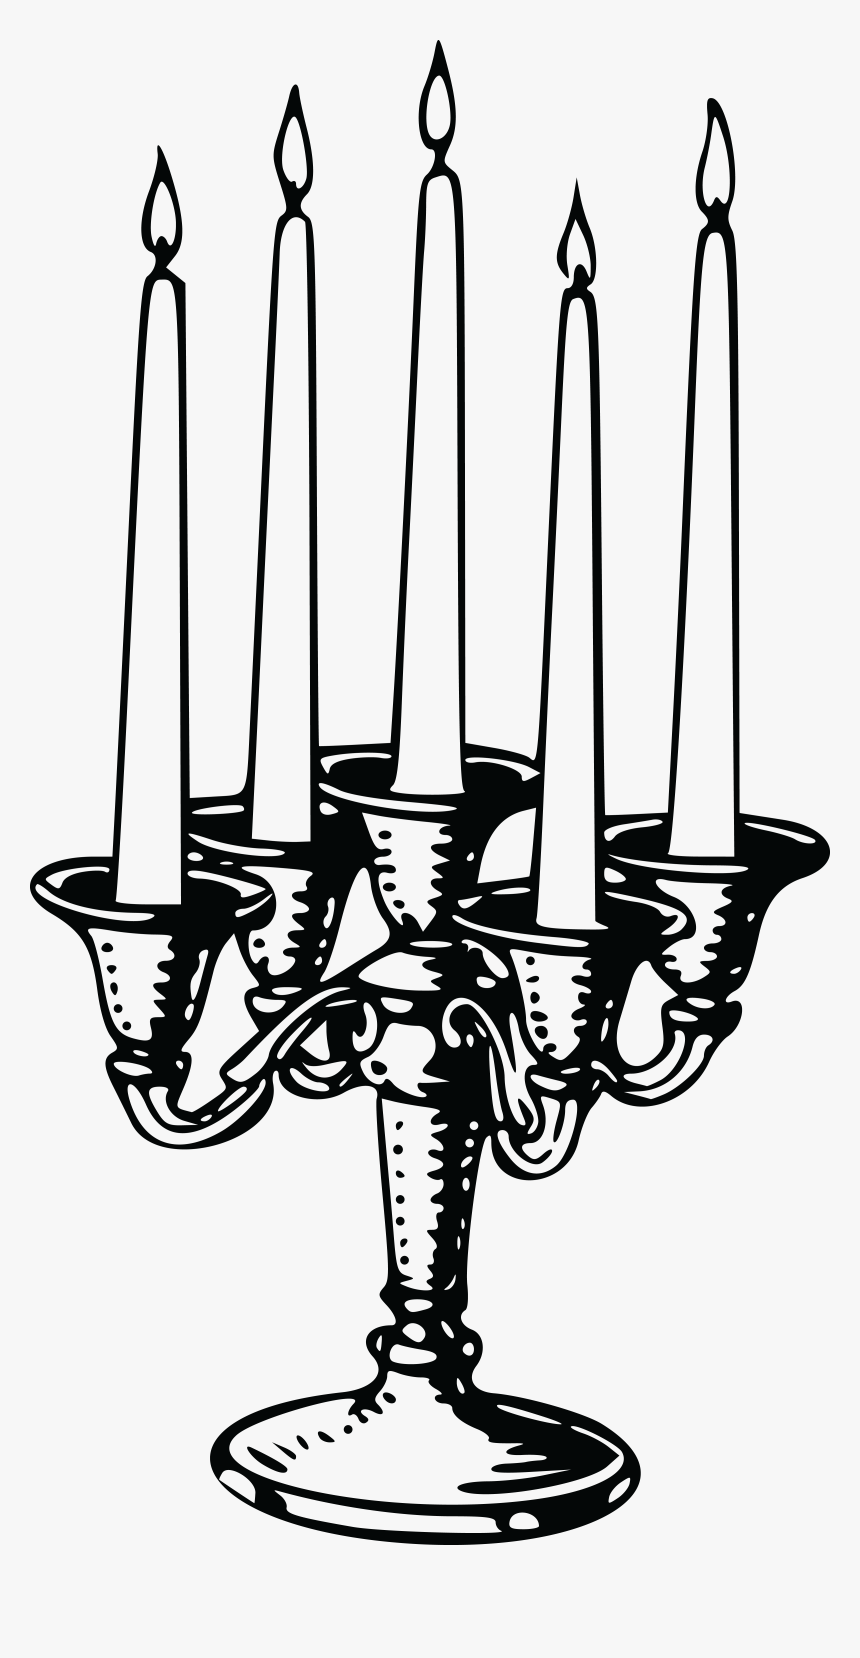 Free Clipart Of A Candle Stick - Groups Of Candles Clip Art Black And White, HD Png Download, Free Download